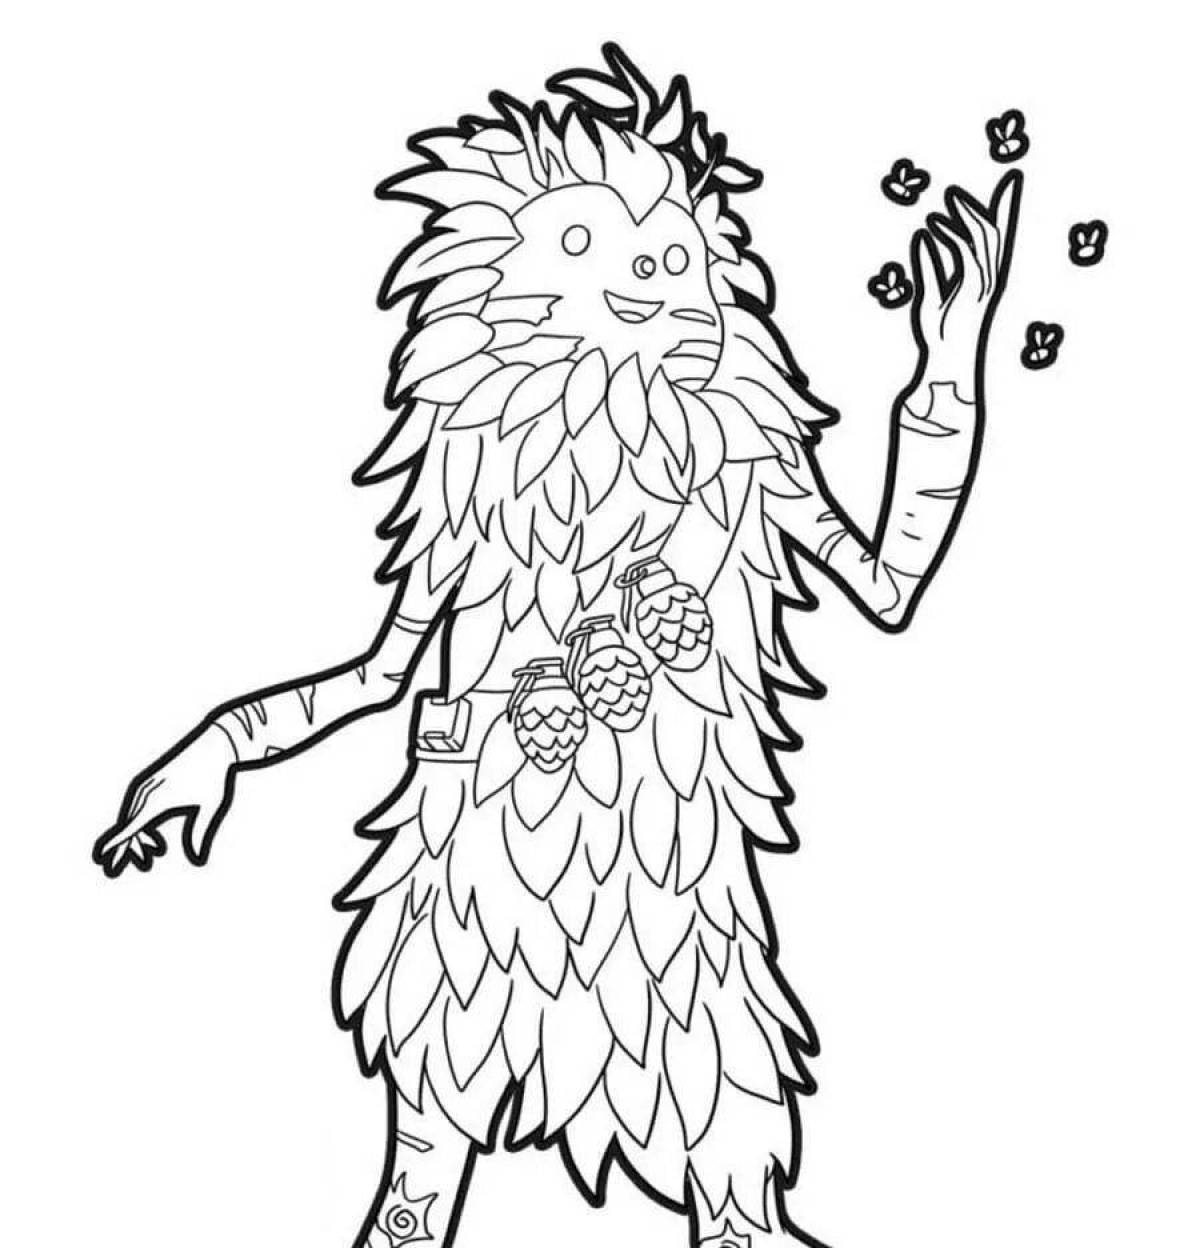 Playful goblin coloring page